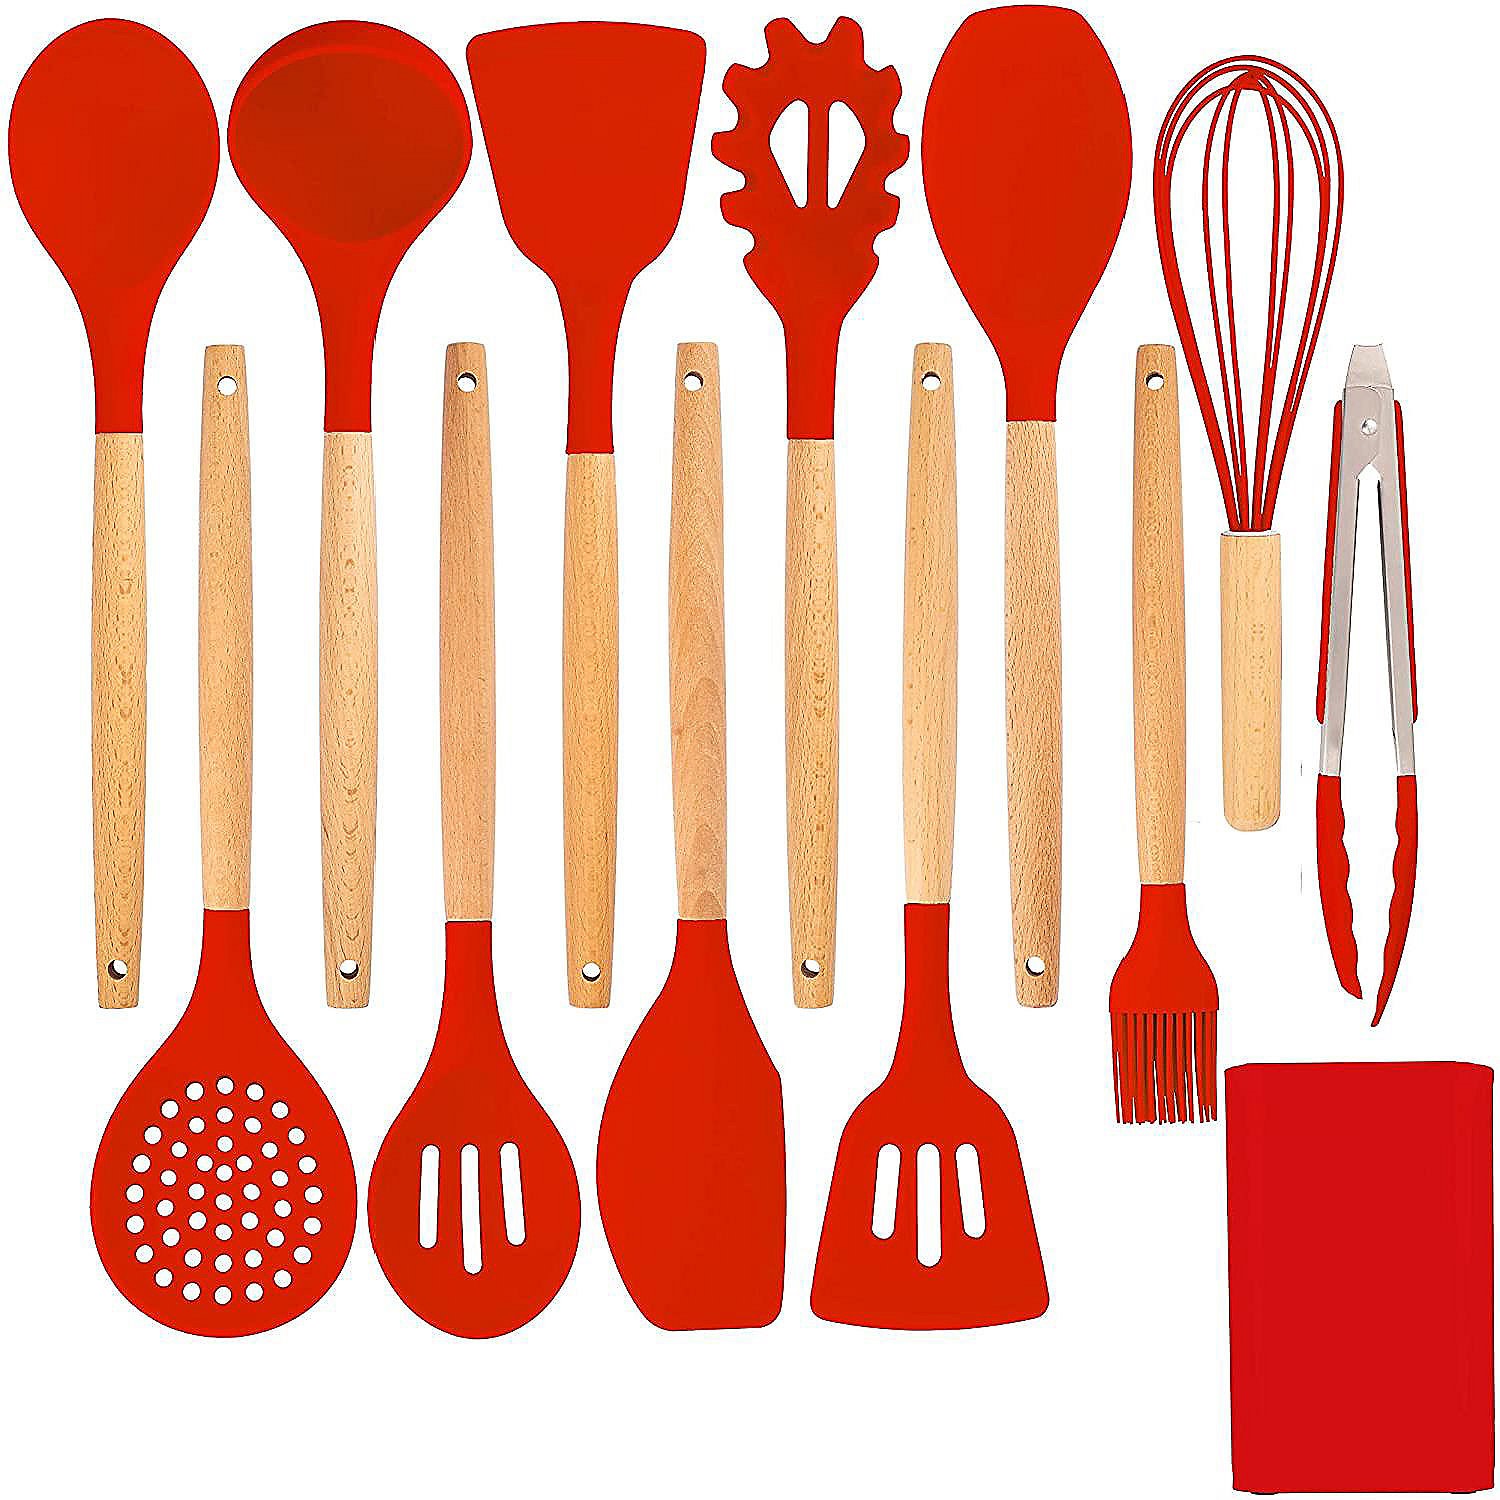 pure-parker-kitchen-silicone-cooking-utensil-13-piece-set-with-stand-red_14210980-a01$NOWA$